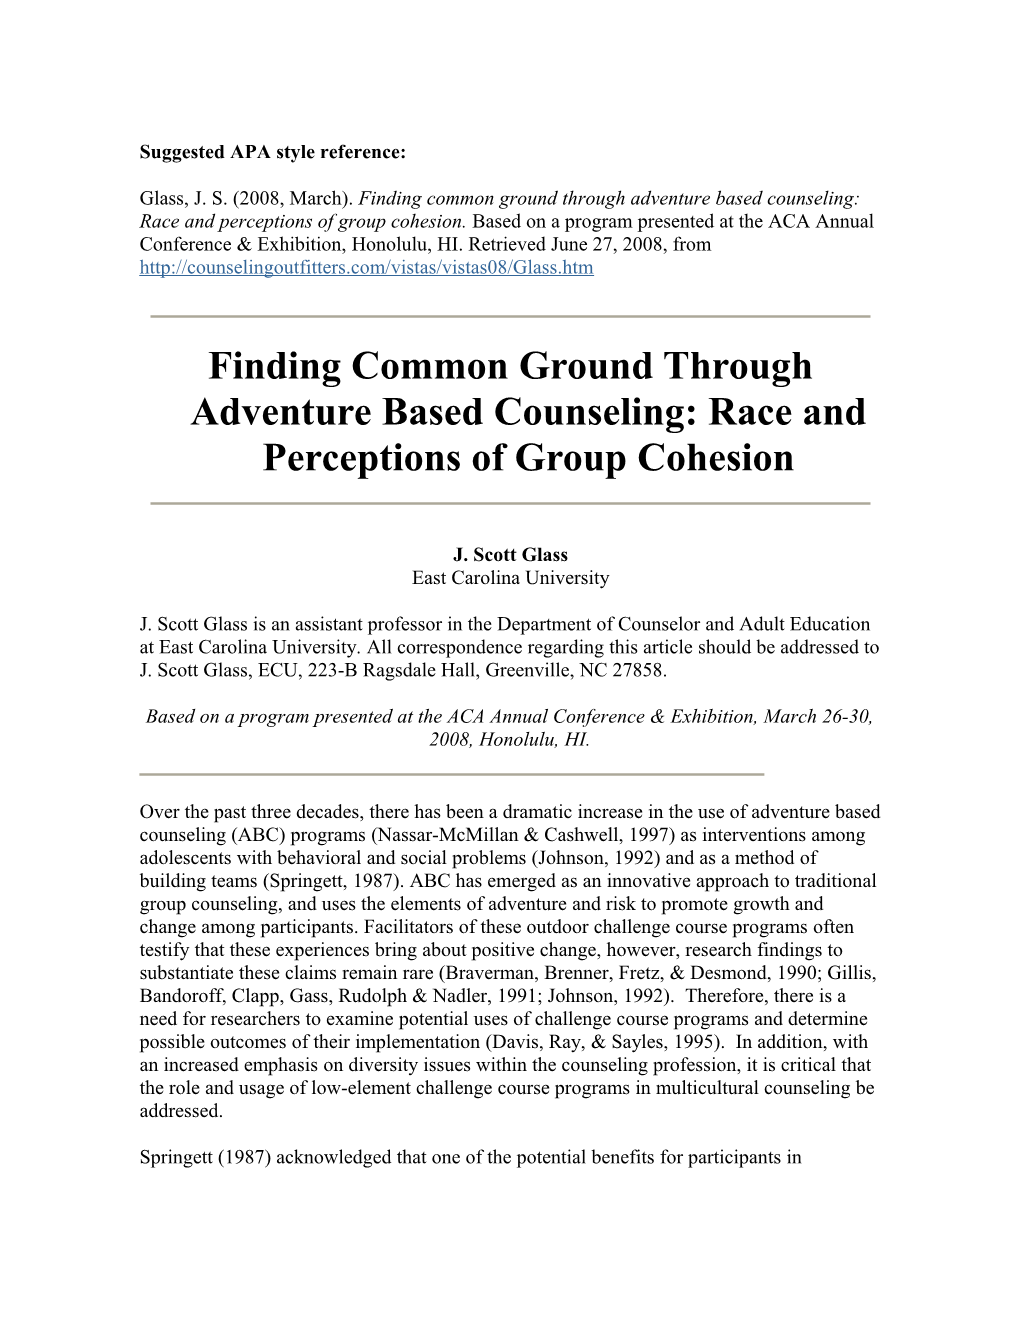 Finding Common Ground Through Adventure Based Counseling: Race and Perceptions of Group Cohesion